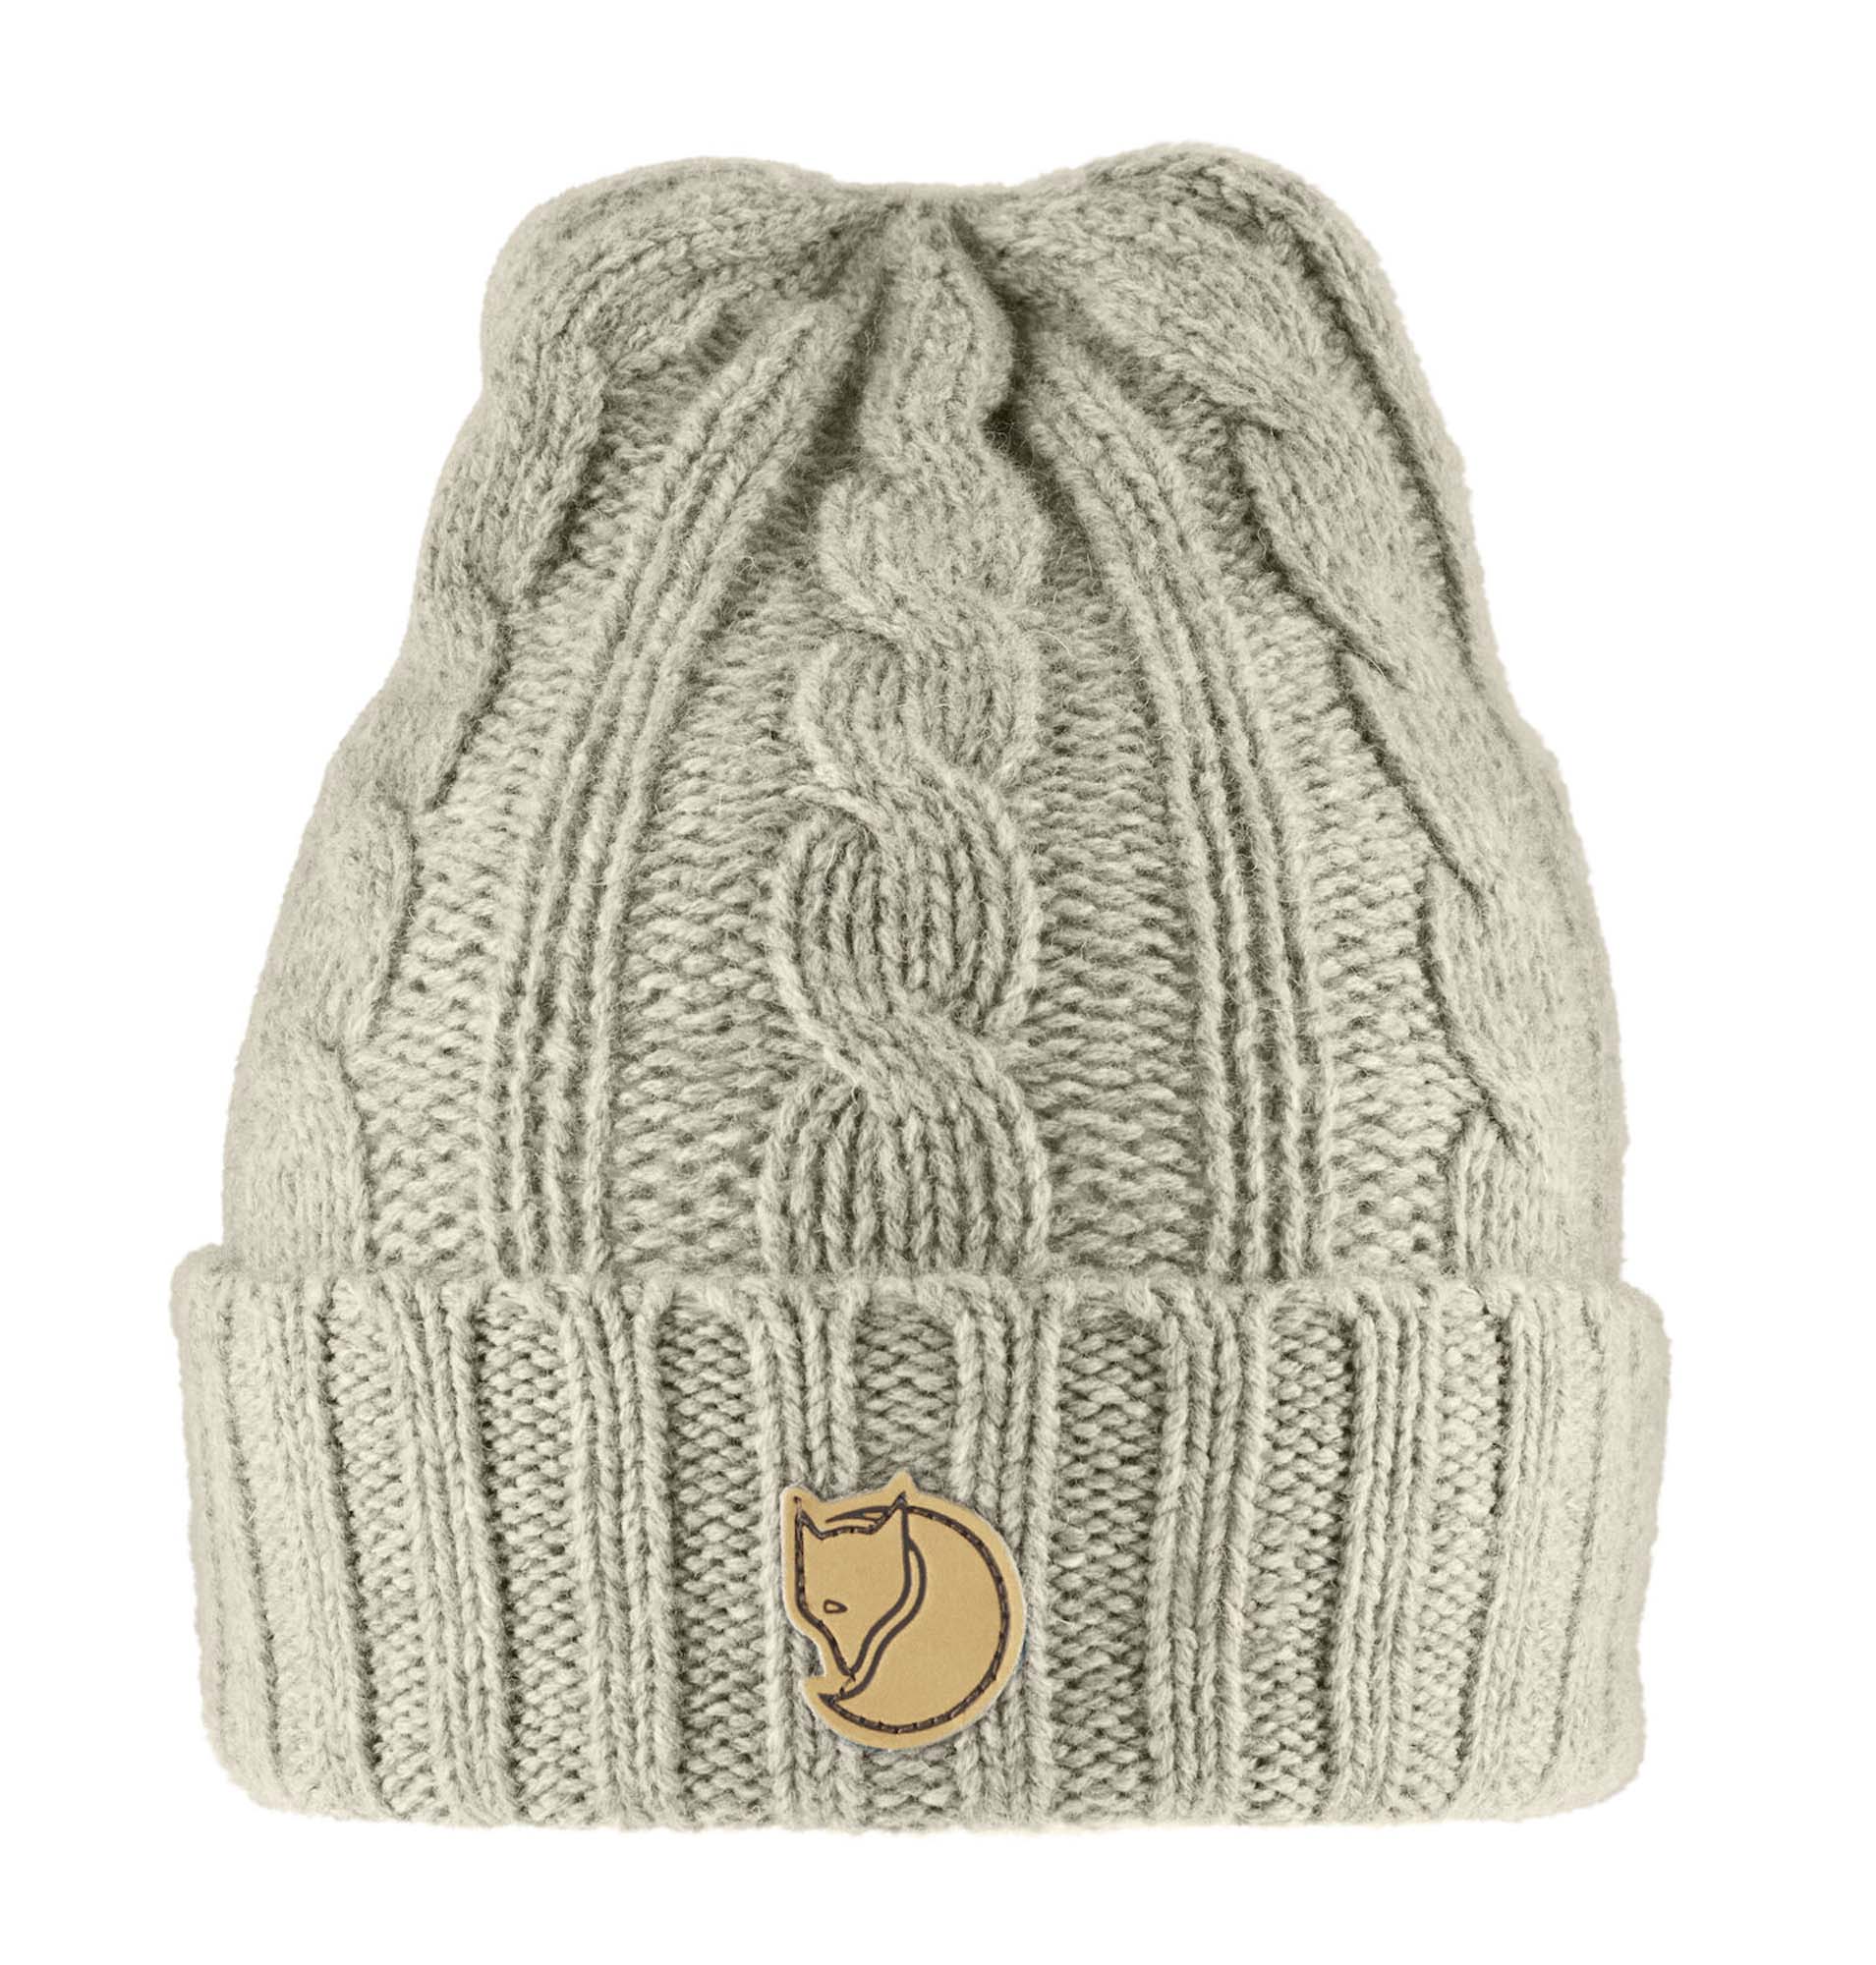 fjall hat braided knit